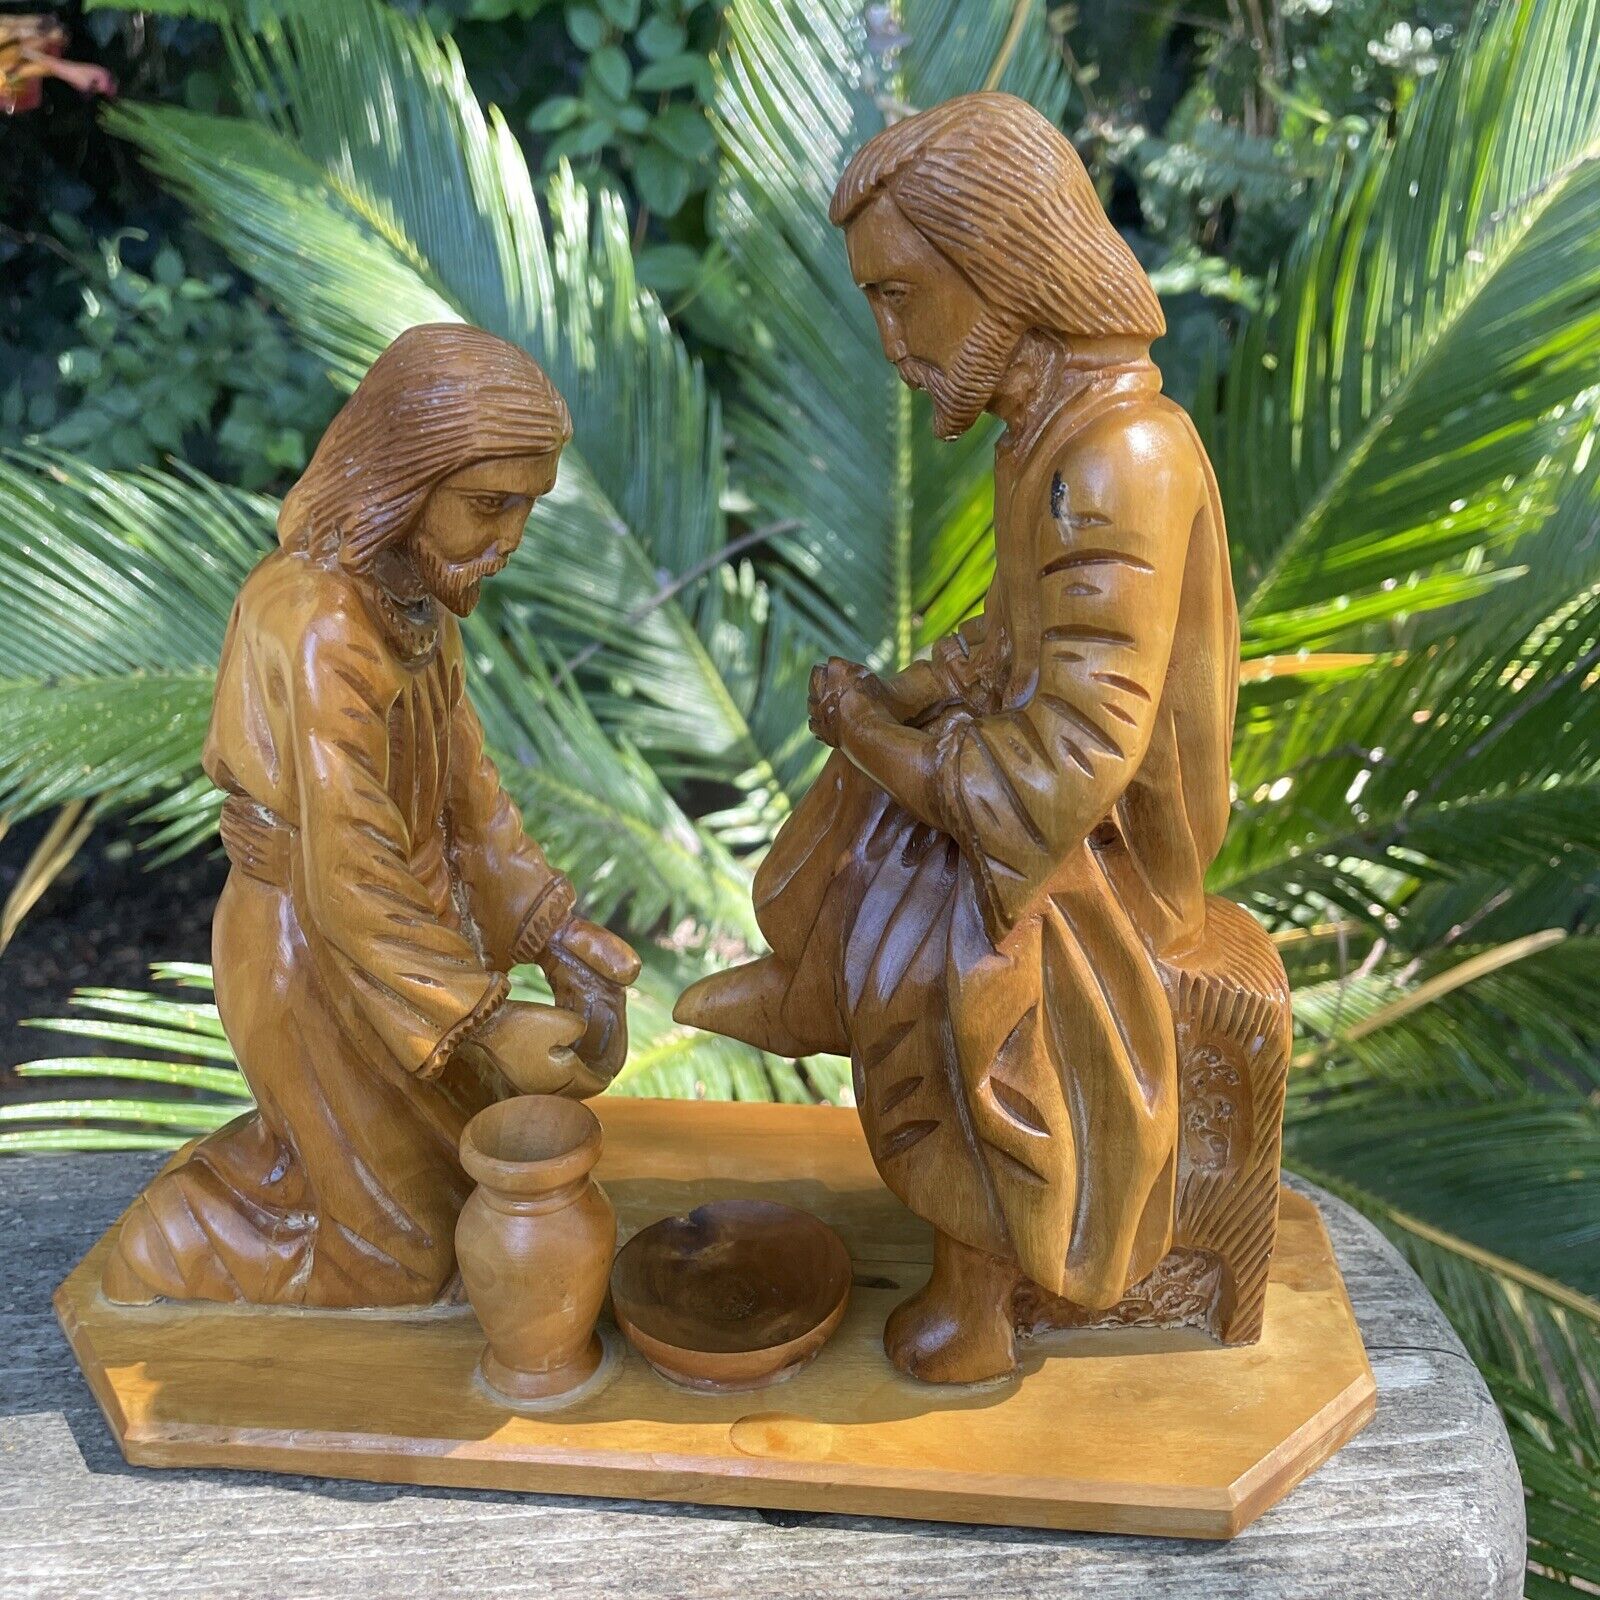 Vintage Olive Wood Hand Carved Jesus Washing Feet From Holy Land 7.5”x7.5” Nice